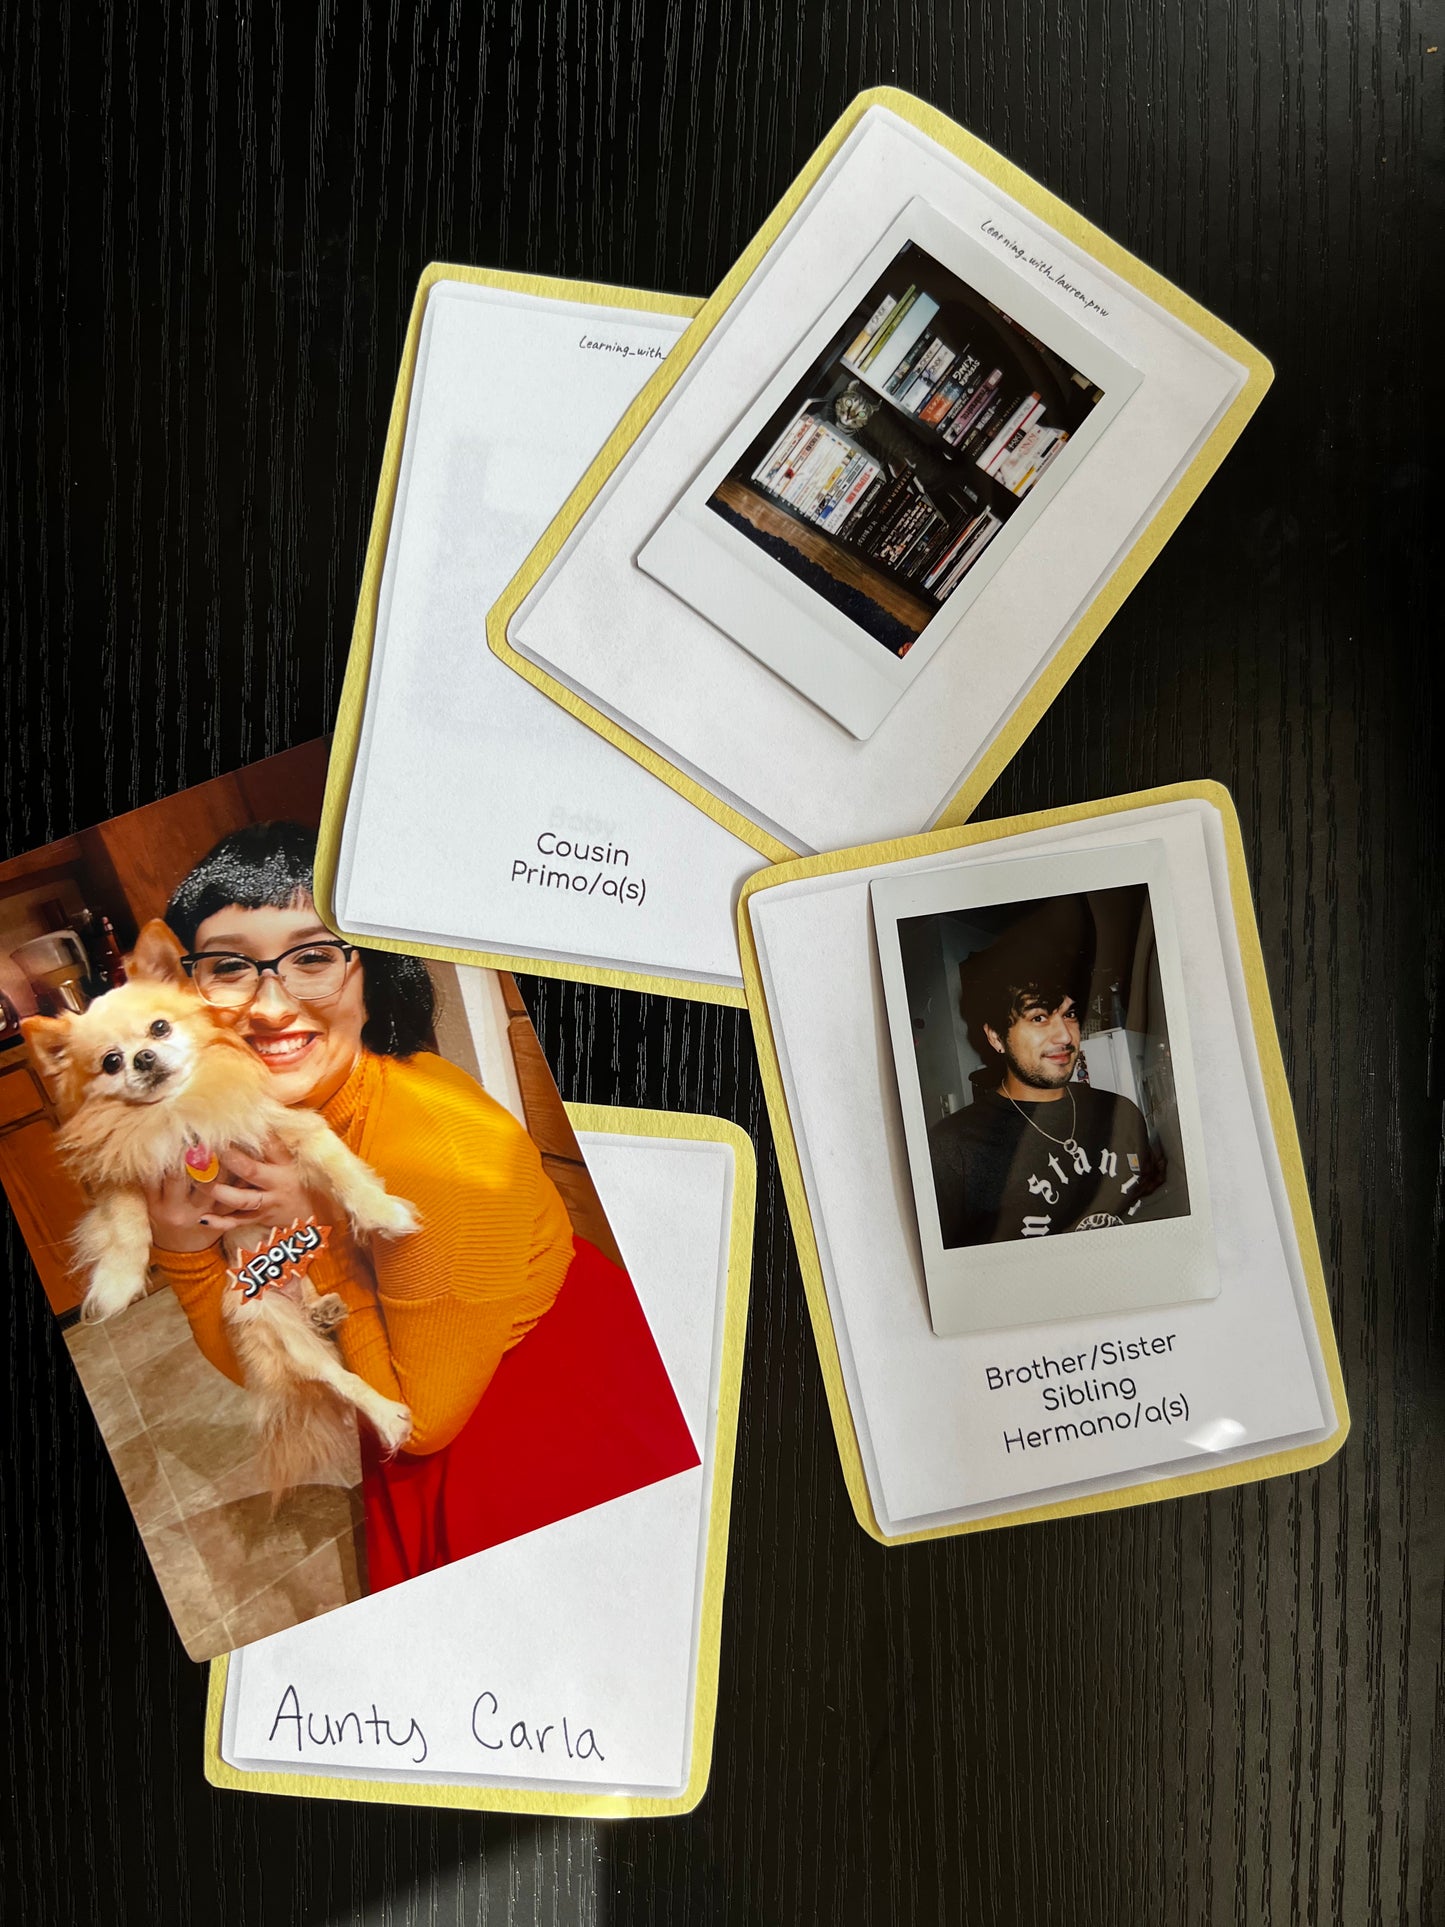 {Large} Flashcards ~ Family & Friends